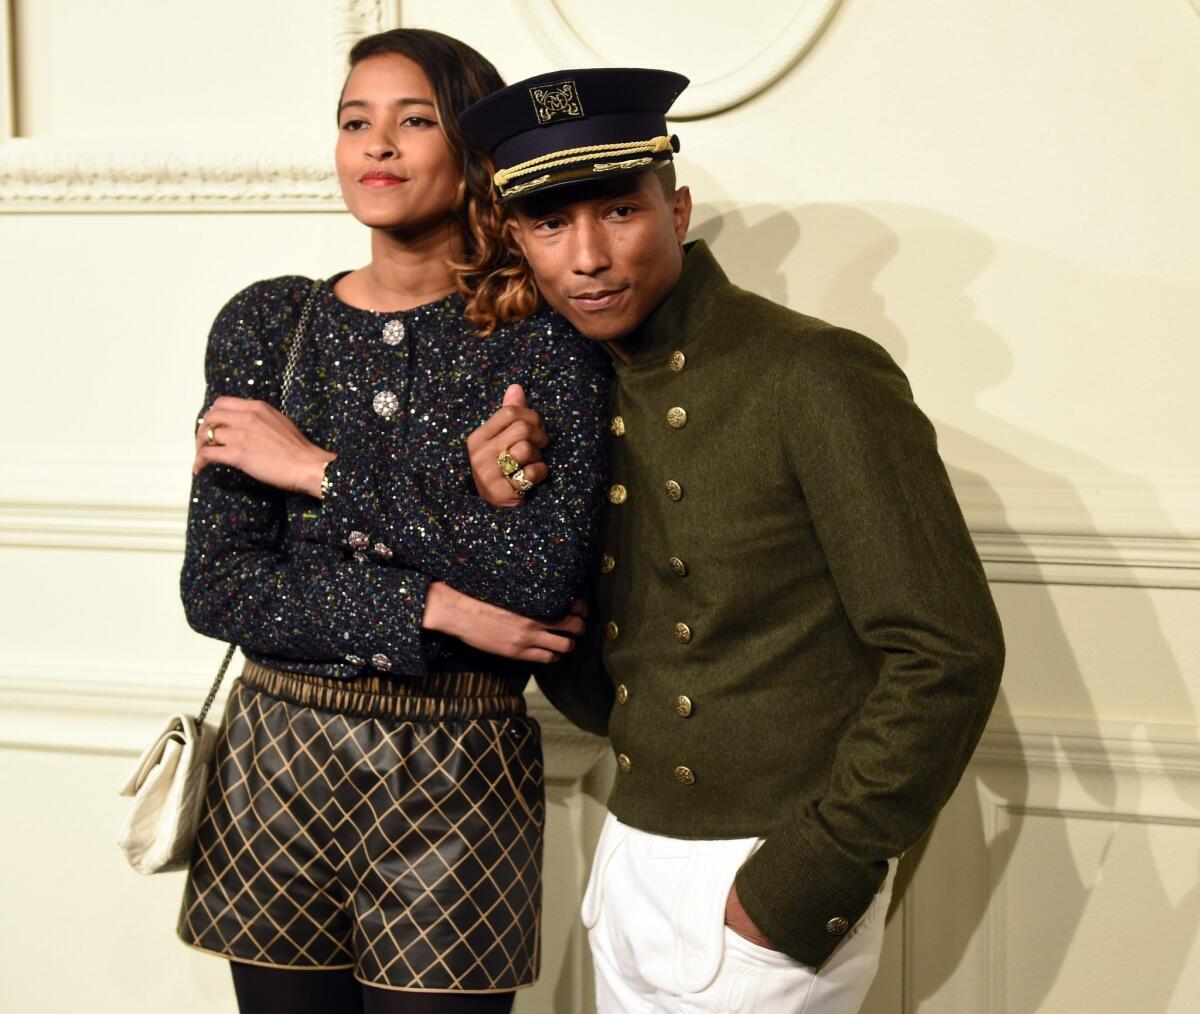 Pharrell Williams and his wife, Helen Lasichanh, arrive as Chanel presents its Paris-Salzburg 2014/15 Metiers d'Art Collection on Tuesday at Park Avenue Armory in New York City.